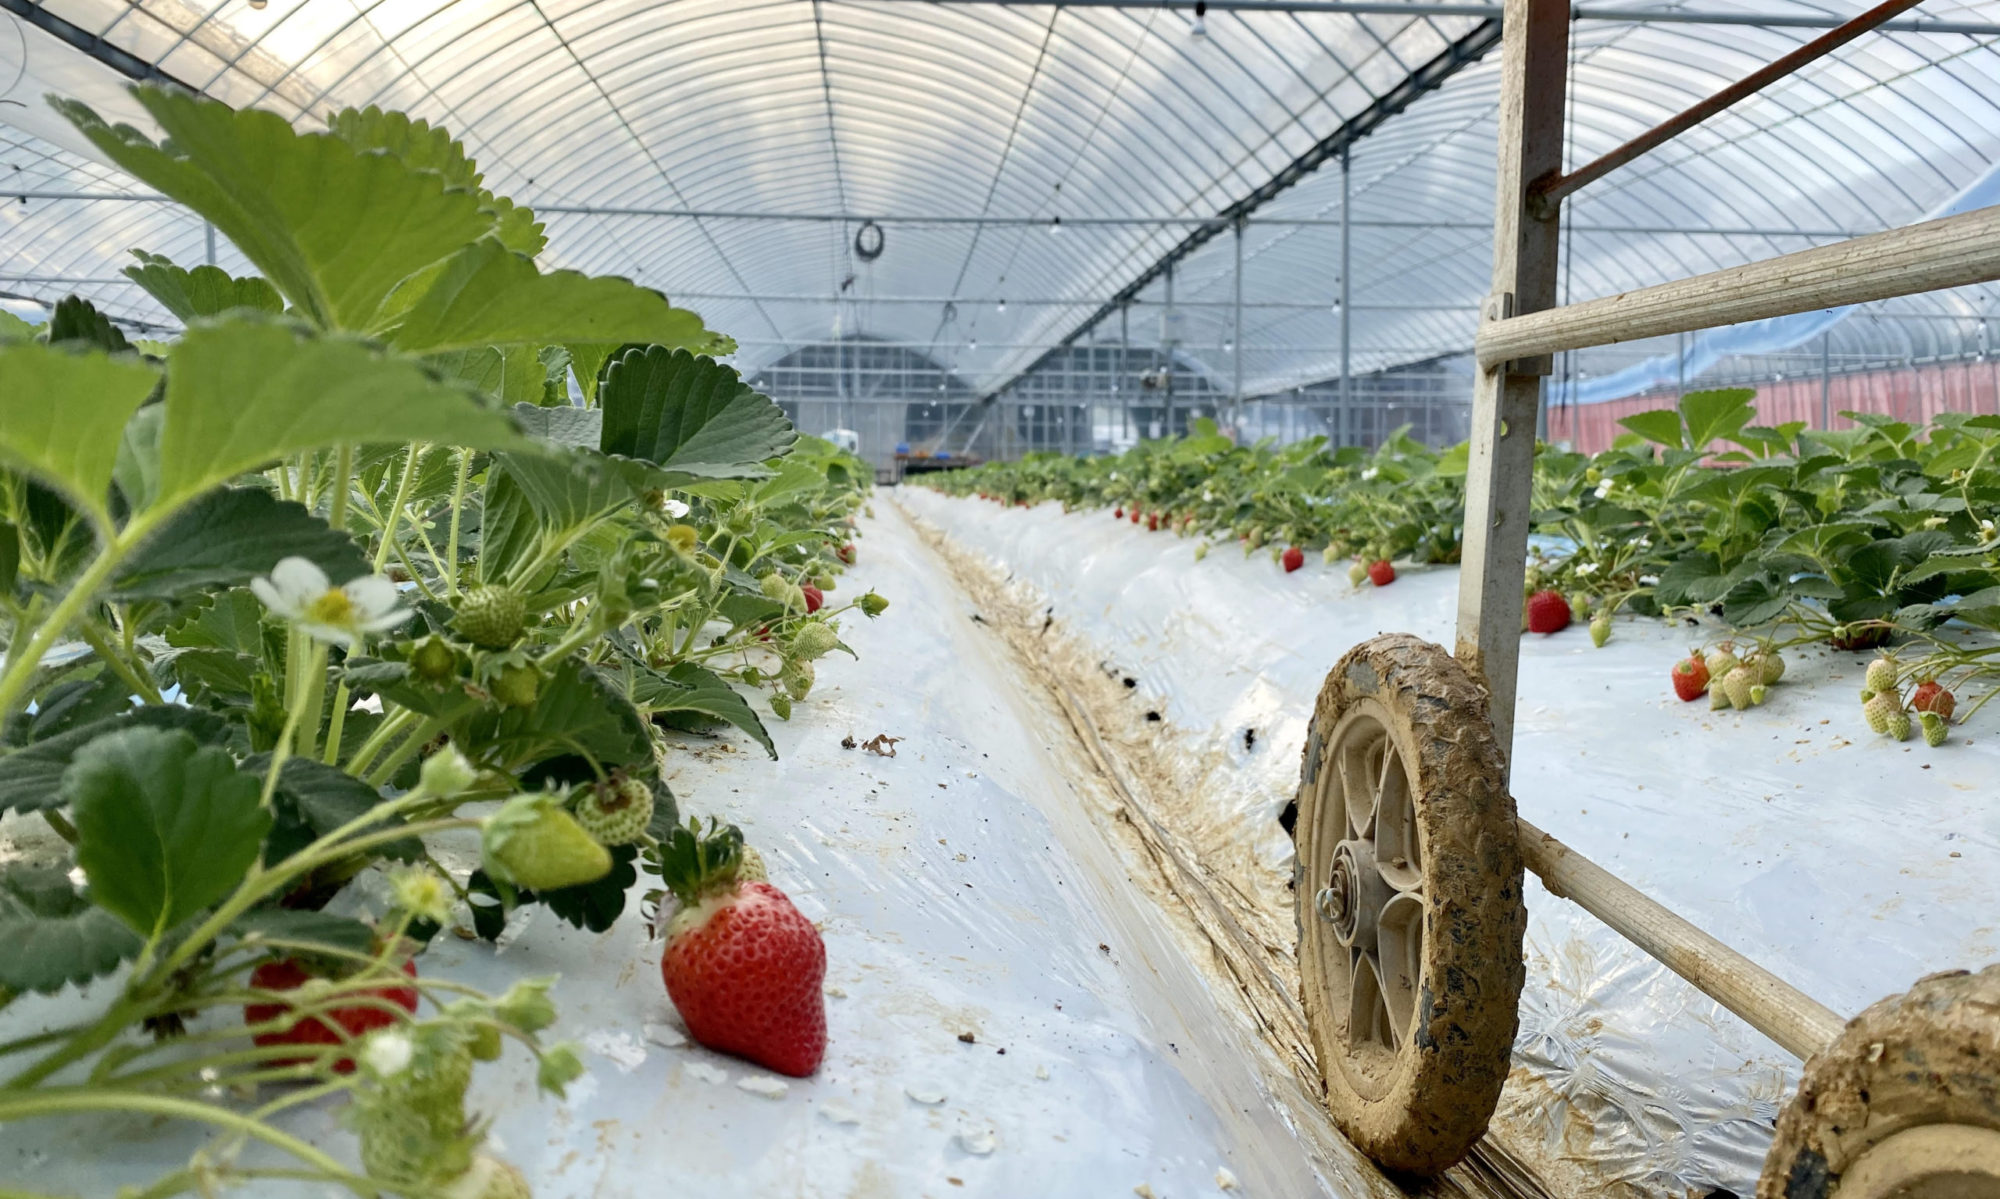 Welcome to Ise Strawberry Fields!